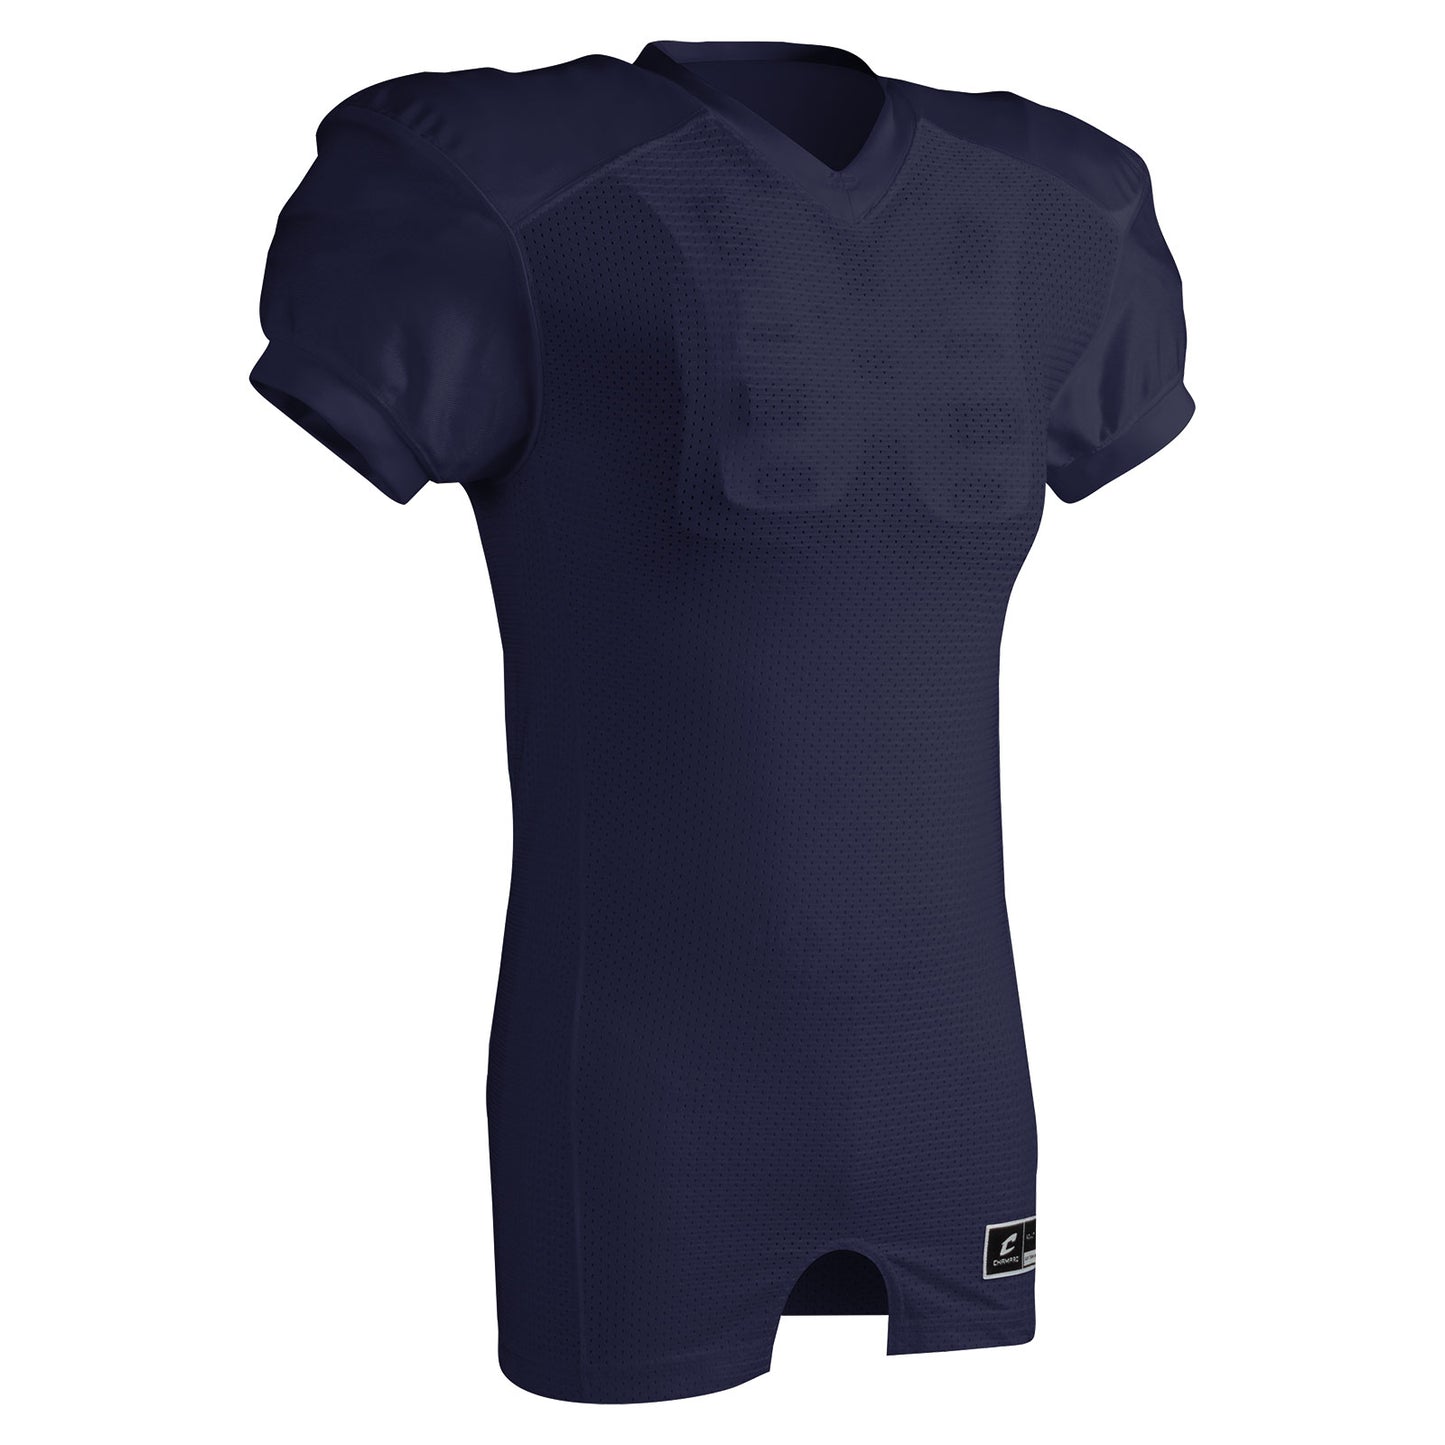 Pro-Fit Collegiate Fit Football Game Jersey NAVY BODY